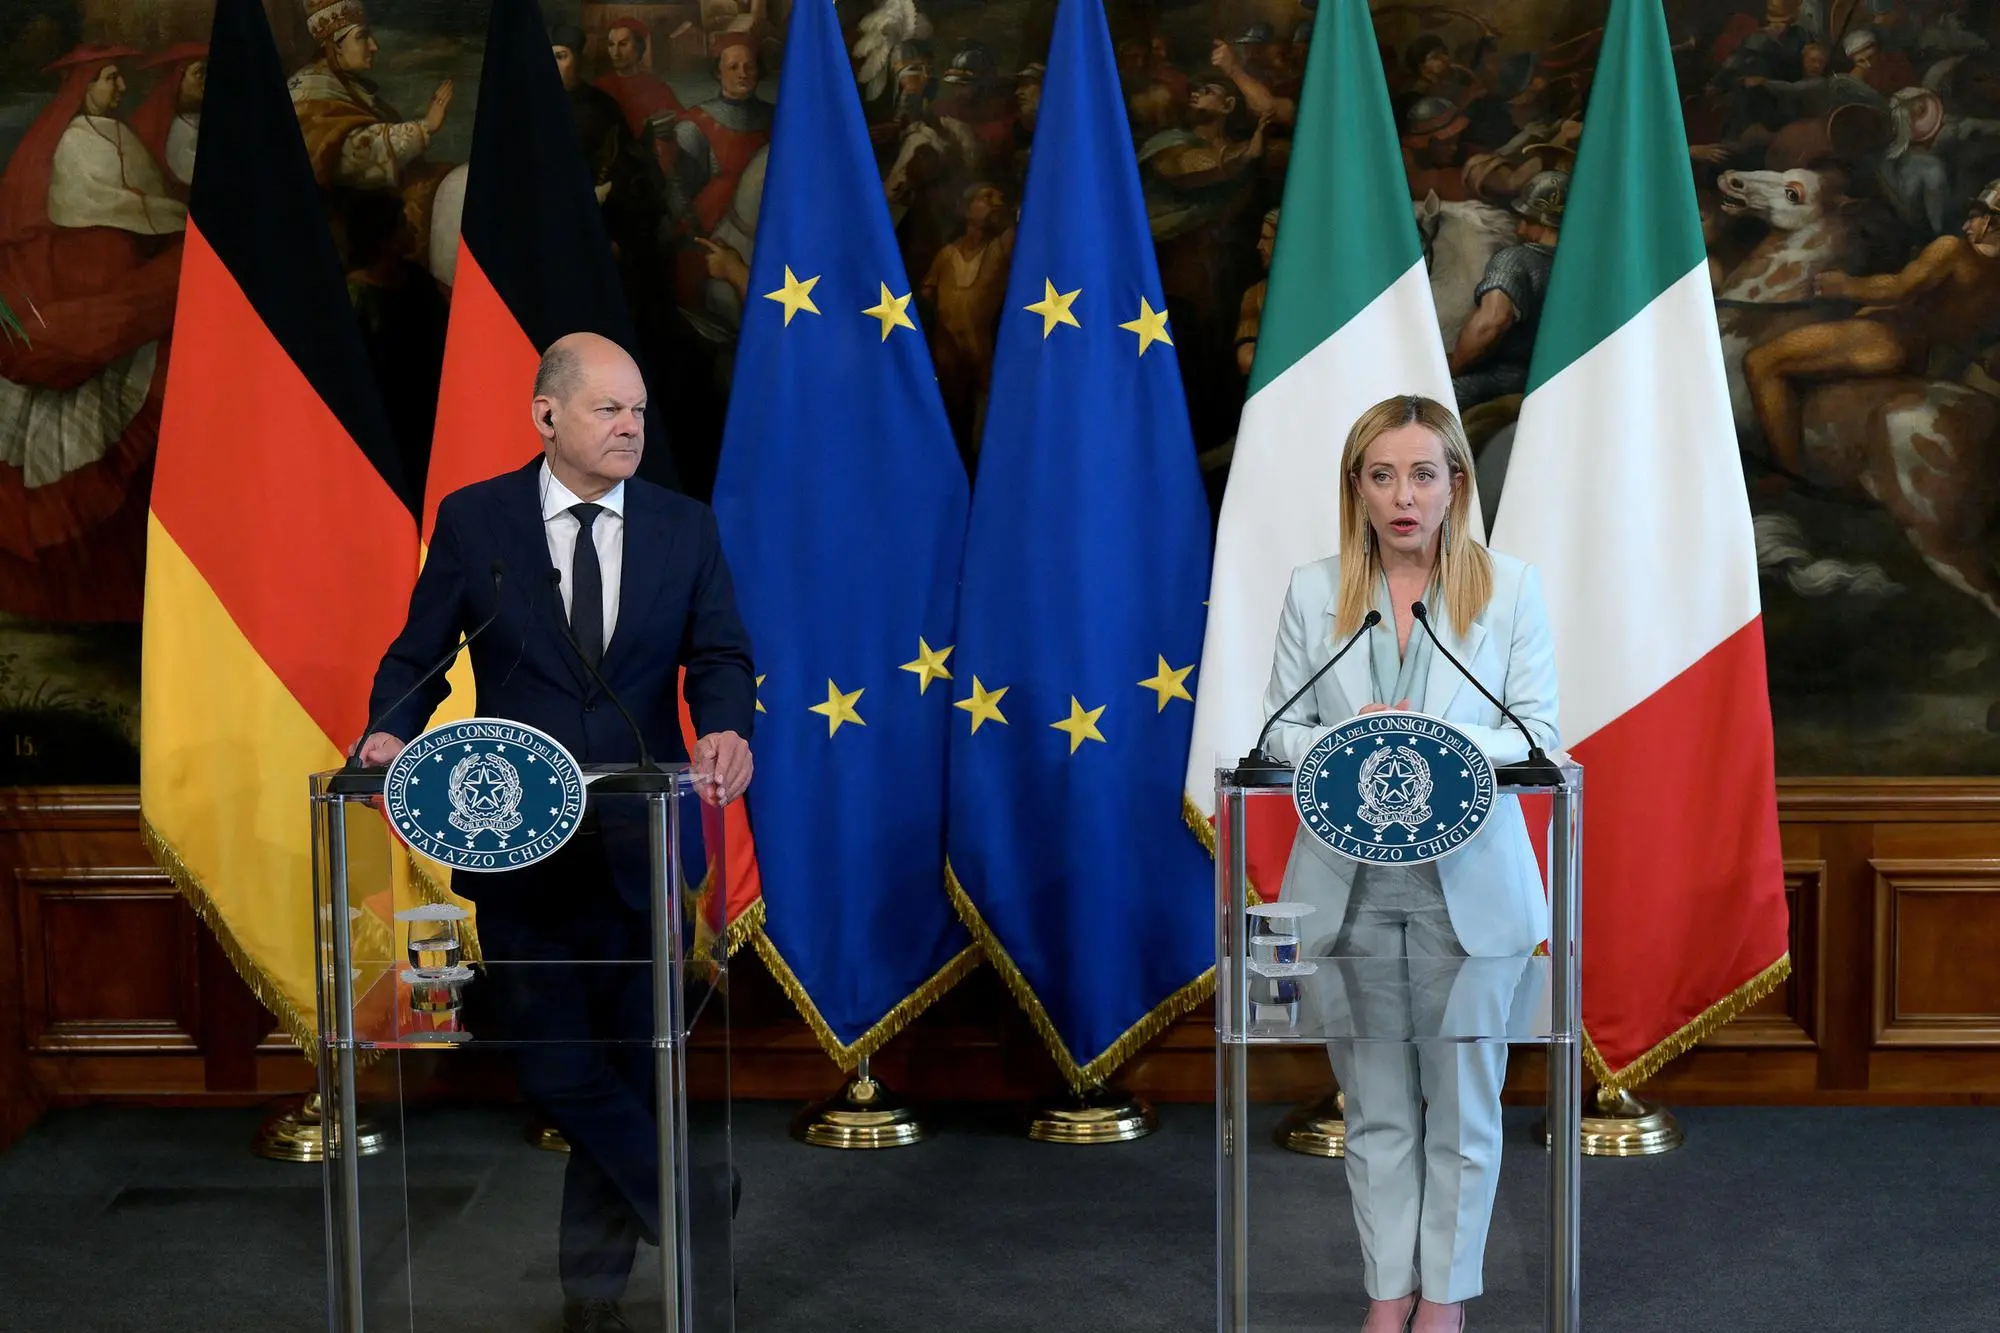 Italian Prime Minister Giorgia Meloni (R) and German Chancellor Olaf Scholz (L) hold a joint news conference following their meeting at Chigi Palace in Rome, Italy, 08 June 2023. ANSA/ETTORE FERRARI